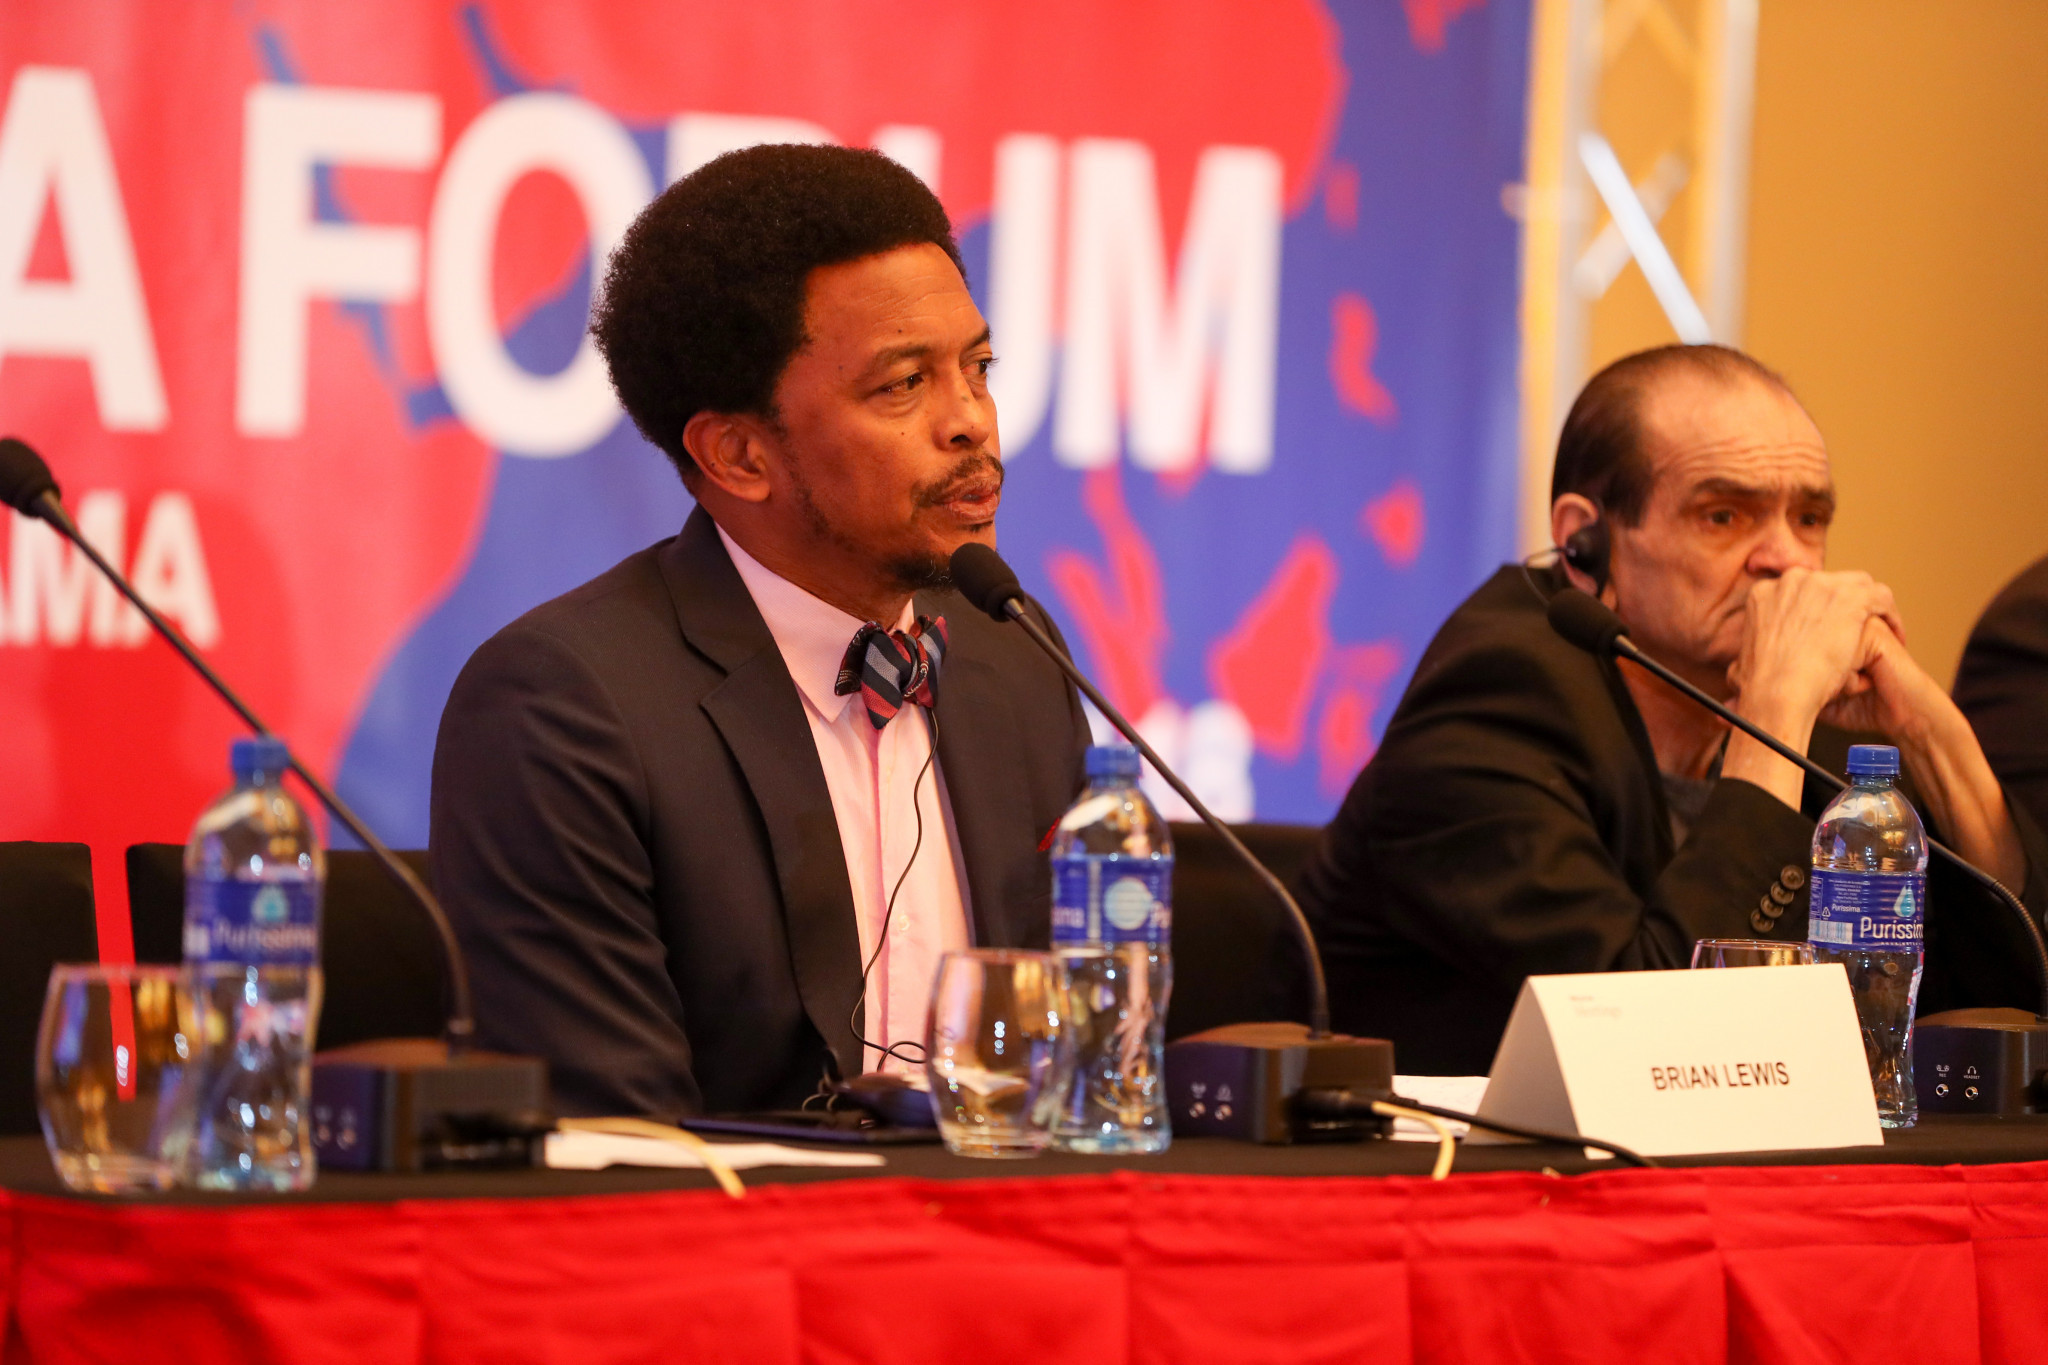 Trinidad and Tobago Olympic Committee President Brian Lewis advised National Federations on how to manage the renovation of Olympic boxing ©AIBA